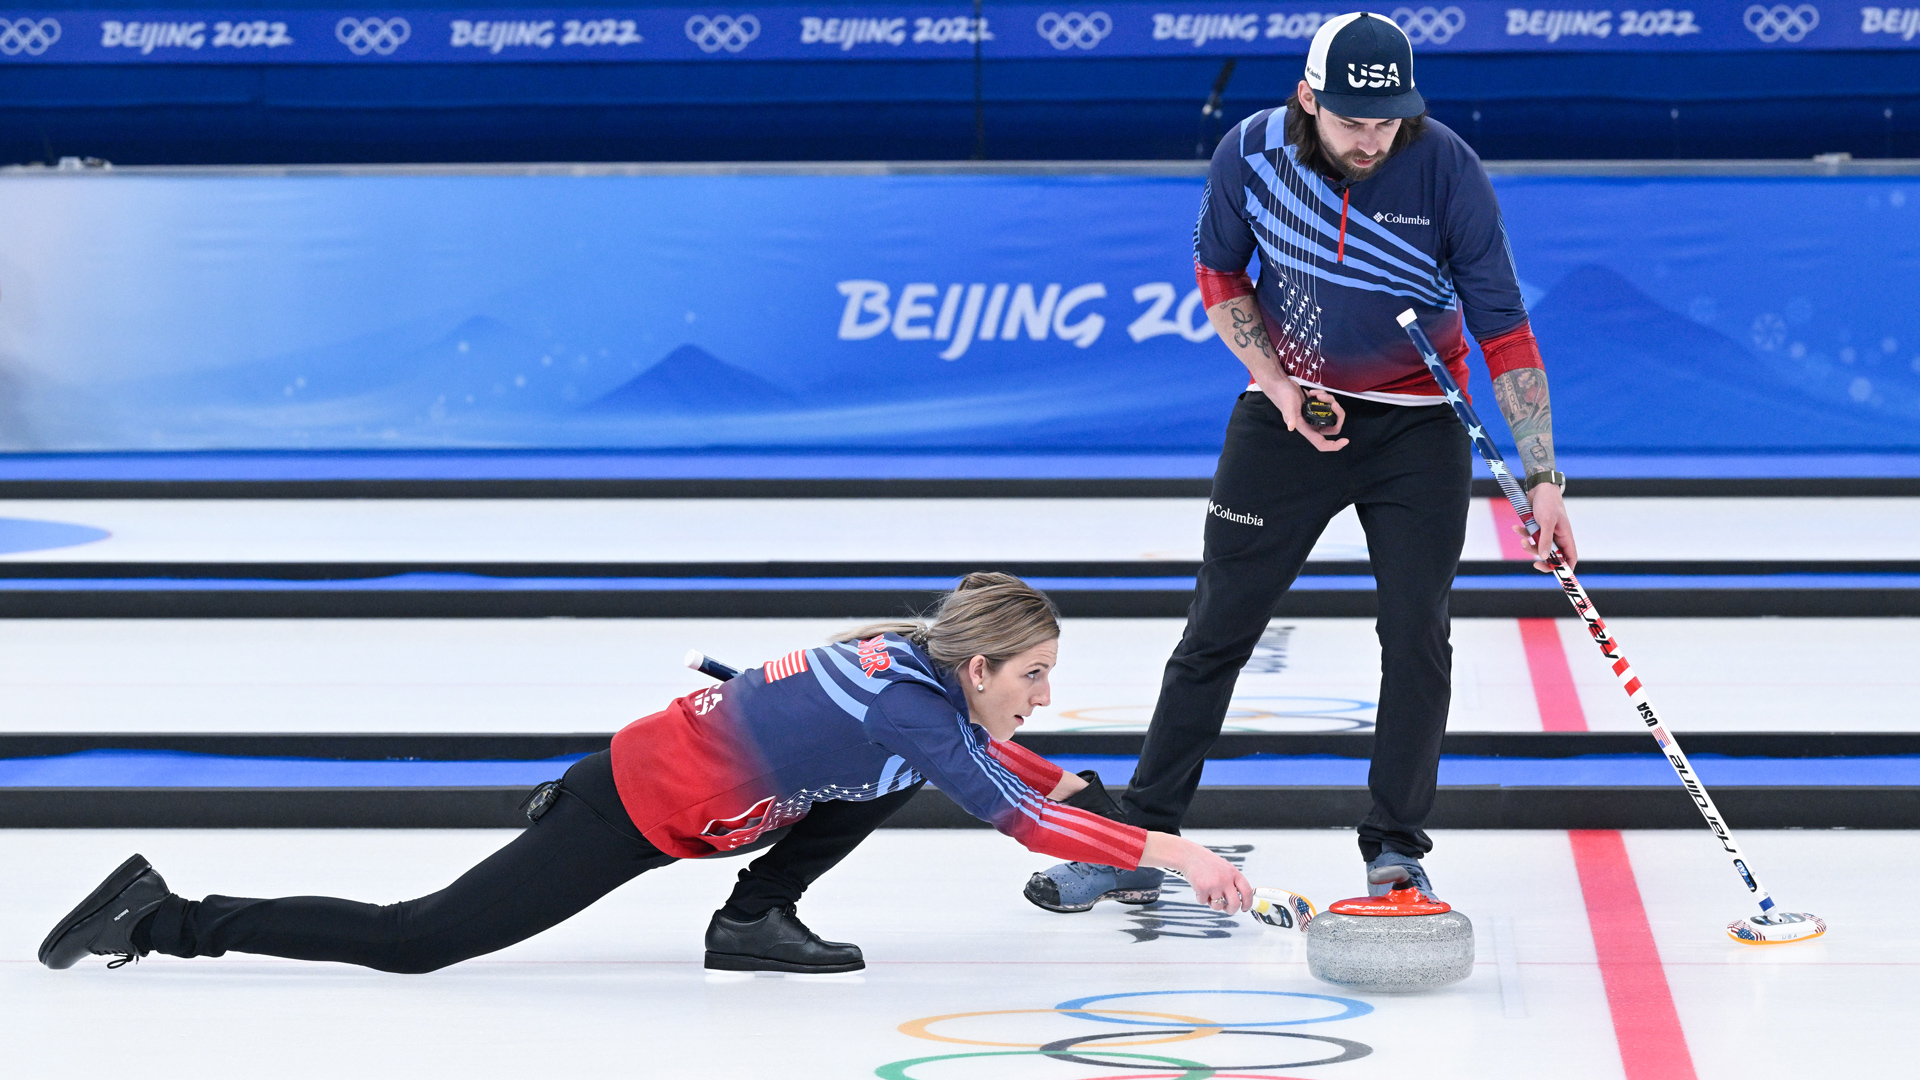 Team USA Wins Thriller Over Sweden in Mixed Doubles Curling